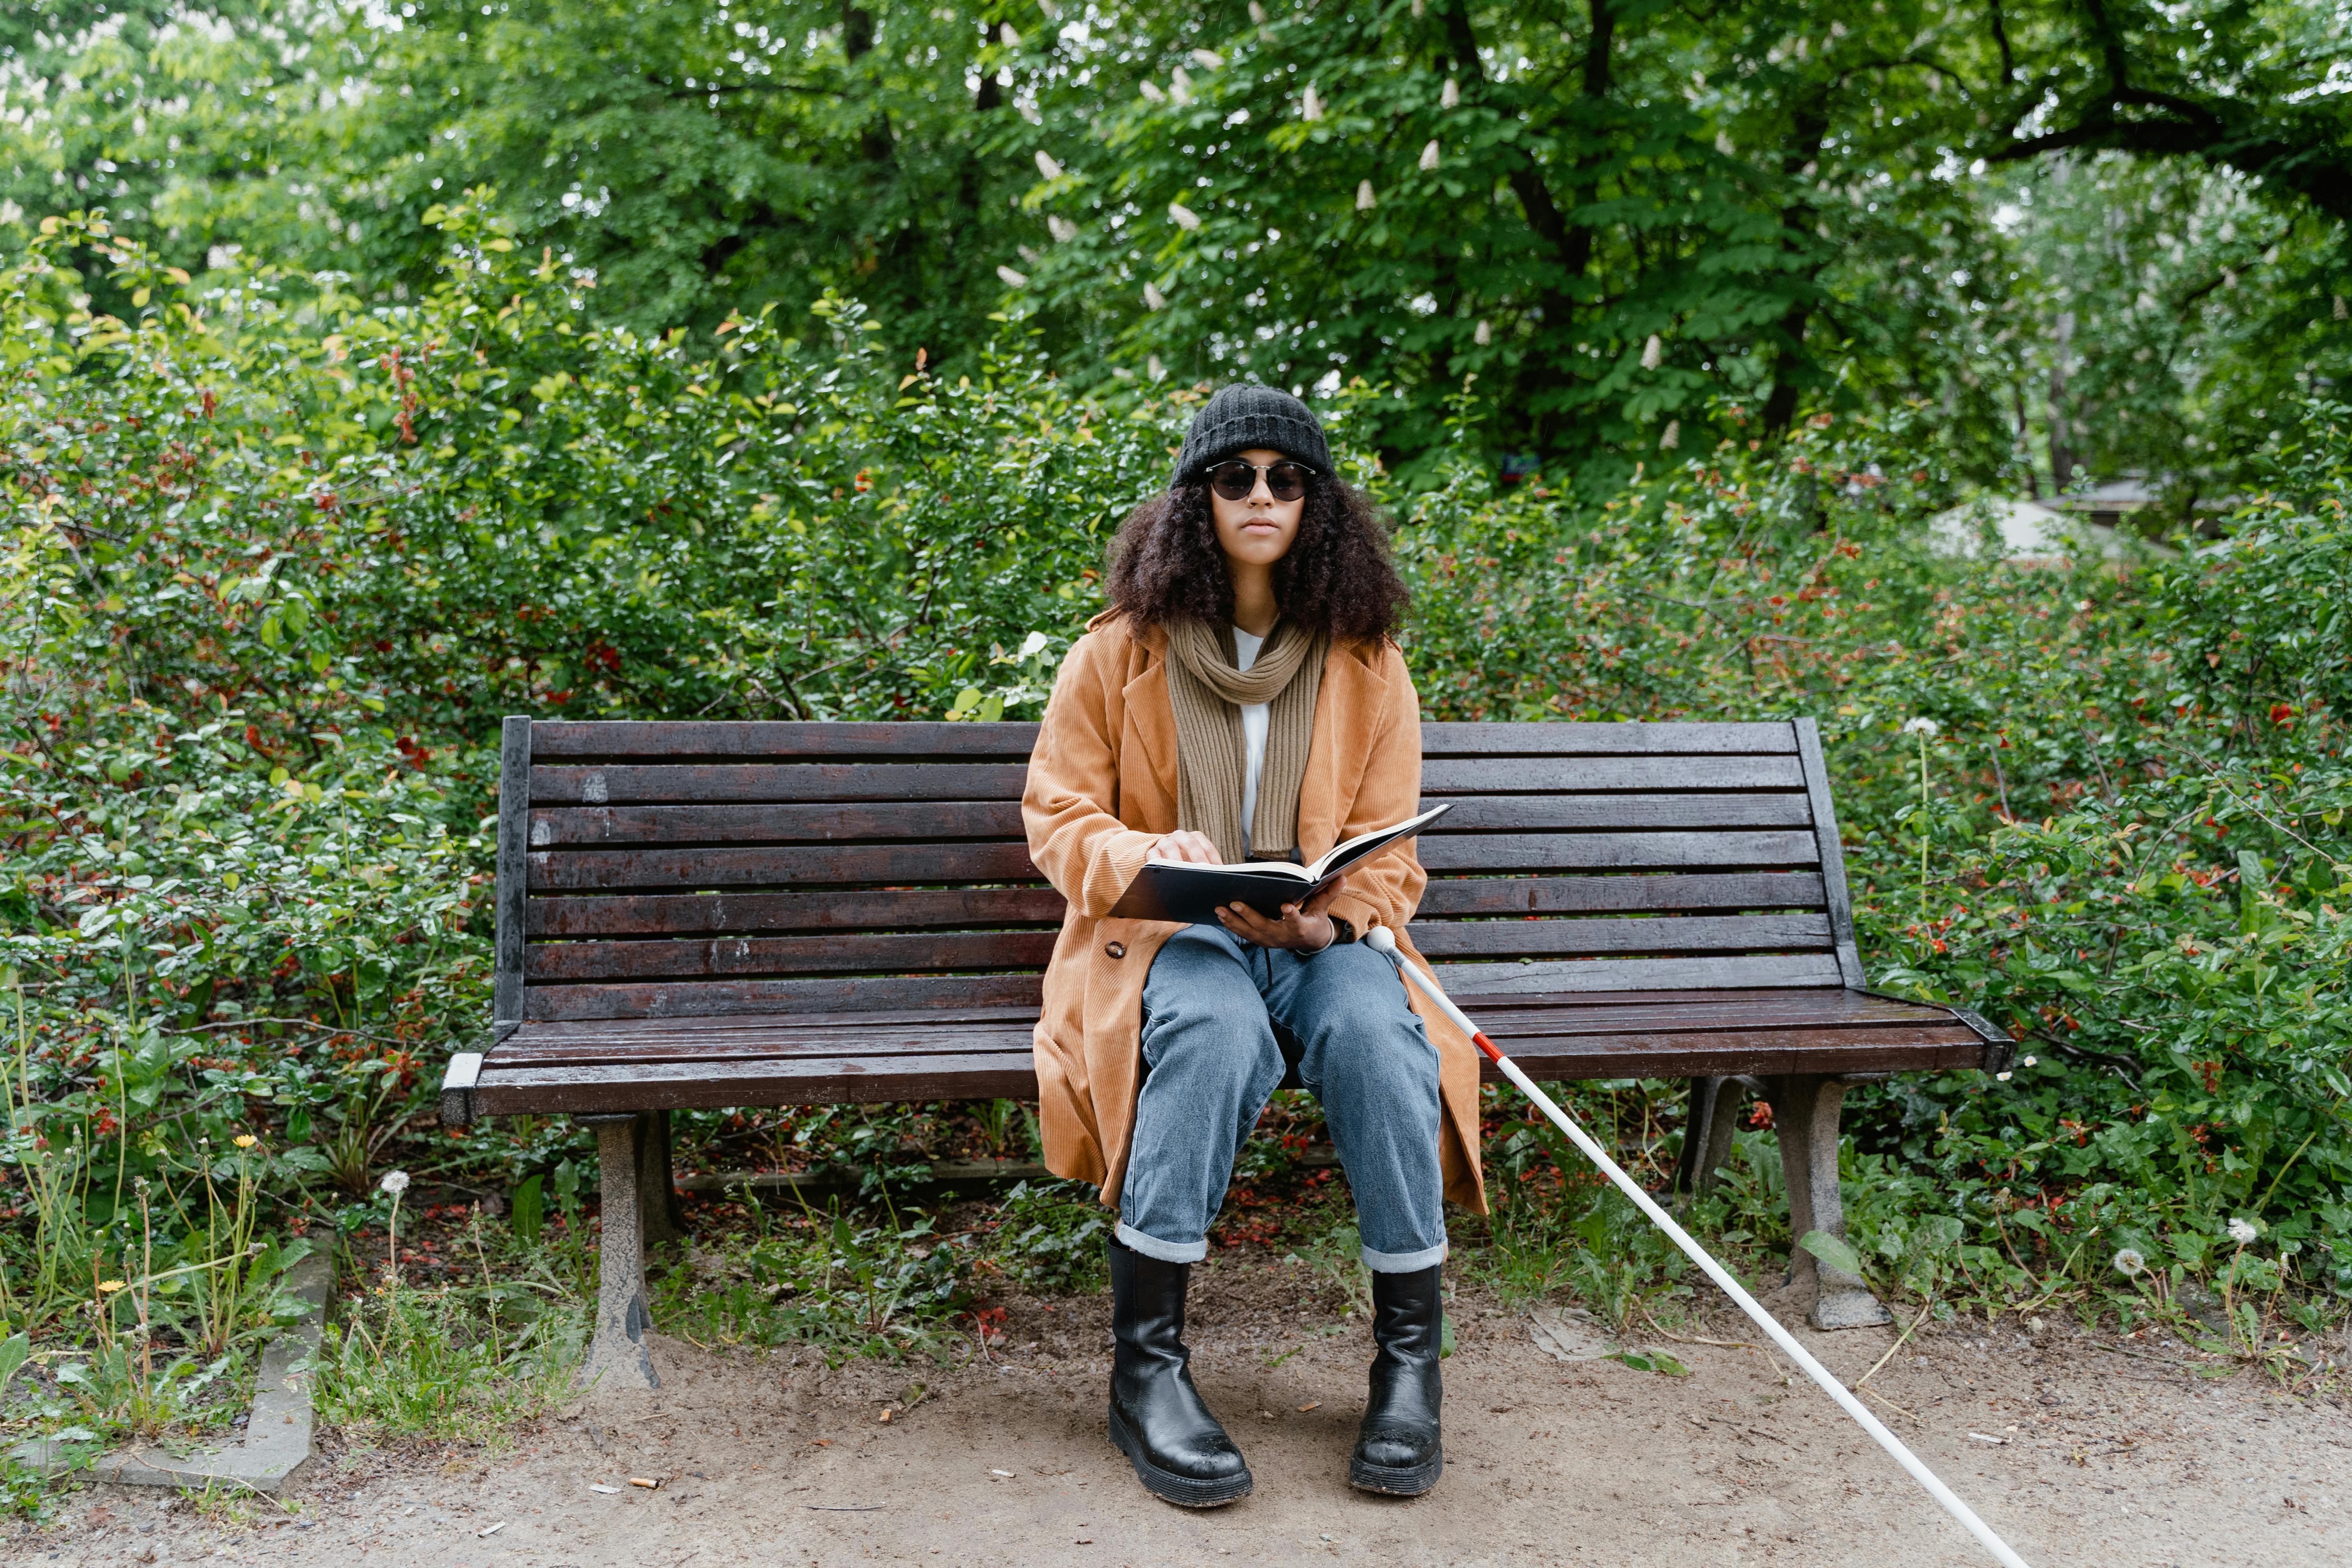 A blind woman on a park bench | Source: Pexels